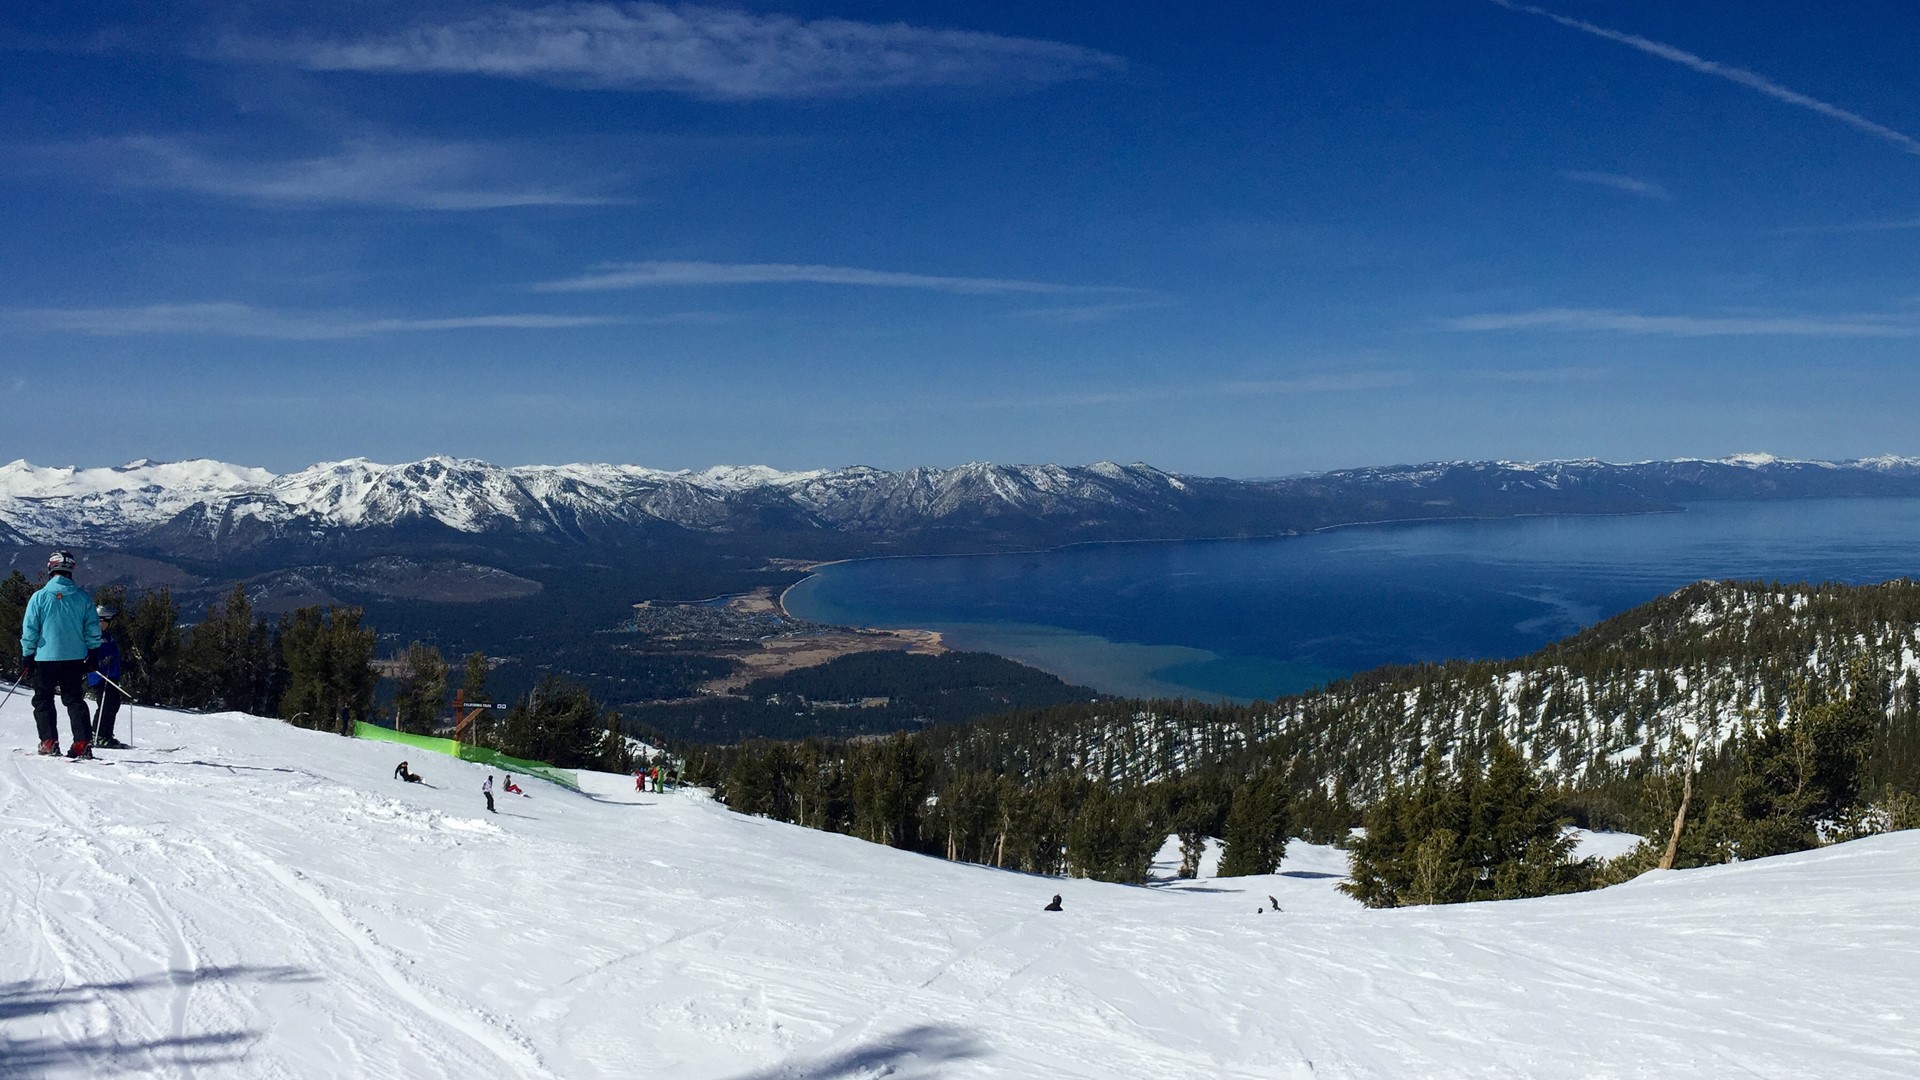 South Lake Tahoe Mayor Tamara Wallace is worried about how local businesses will be impacted by the upcoming stay-at-home orders.